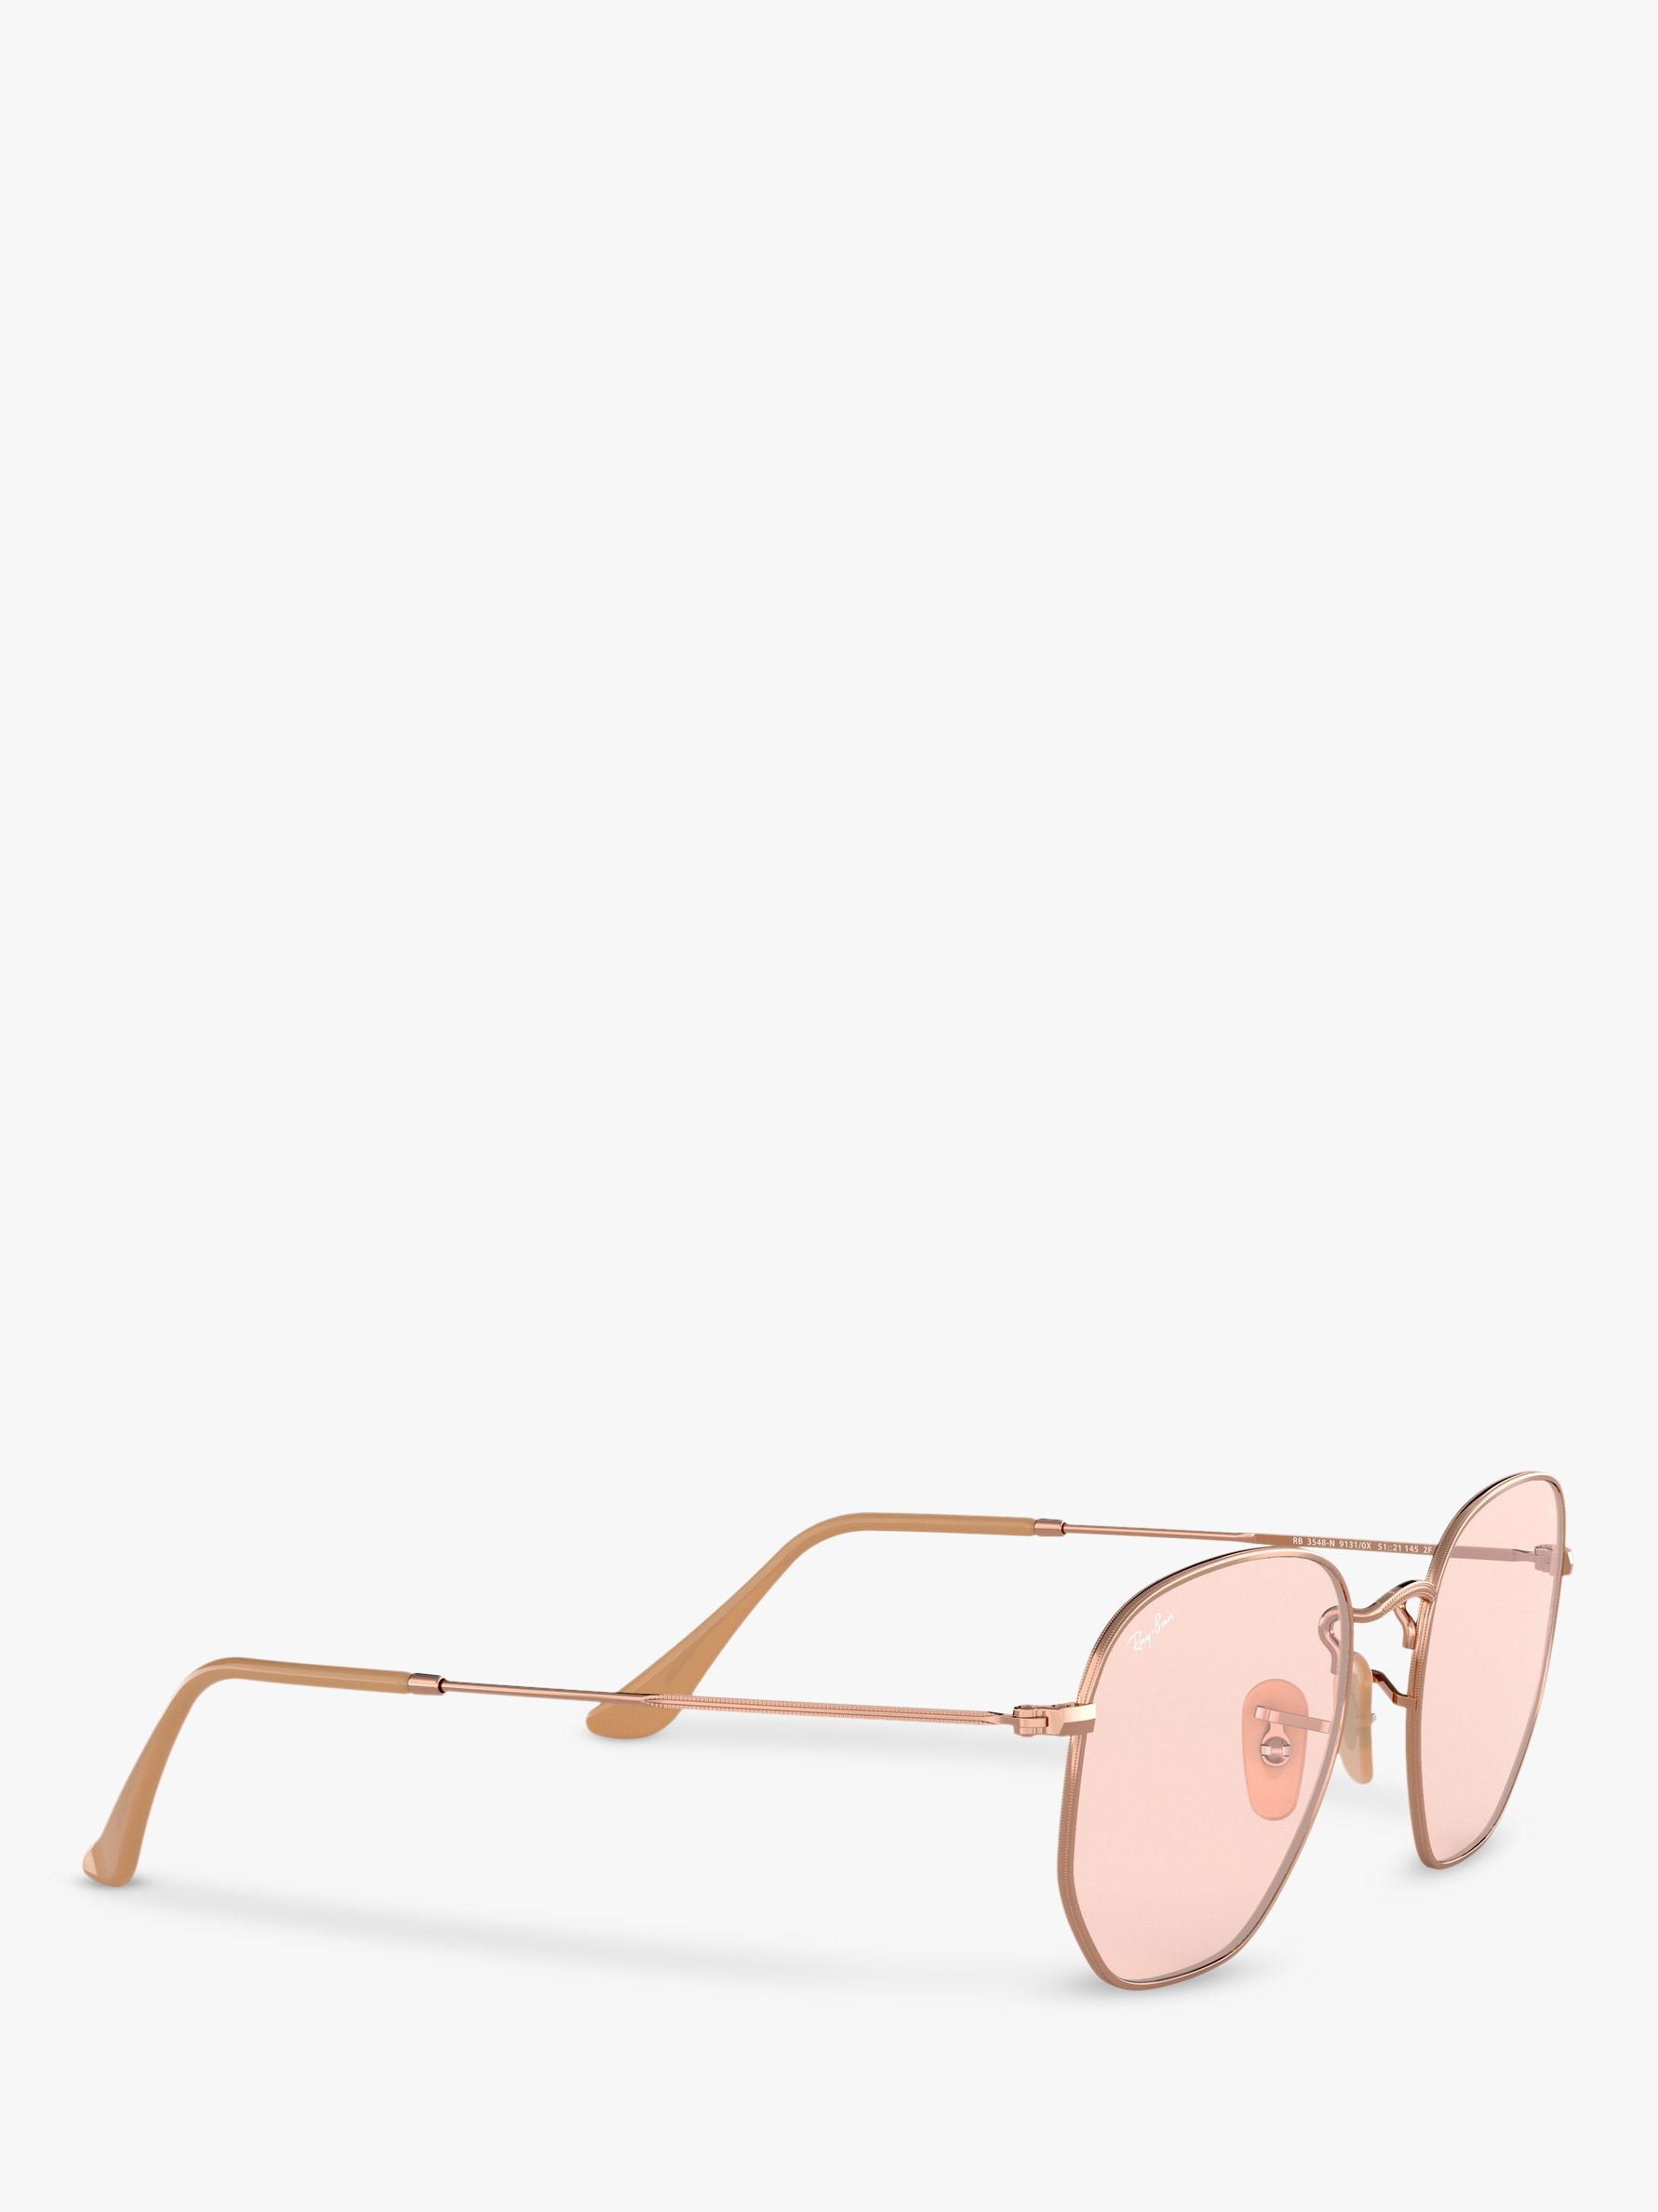 Ray Ban Rb3548n Hexgonal Sunglasses Copper Pink At John Lewis And Partners